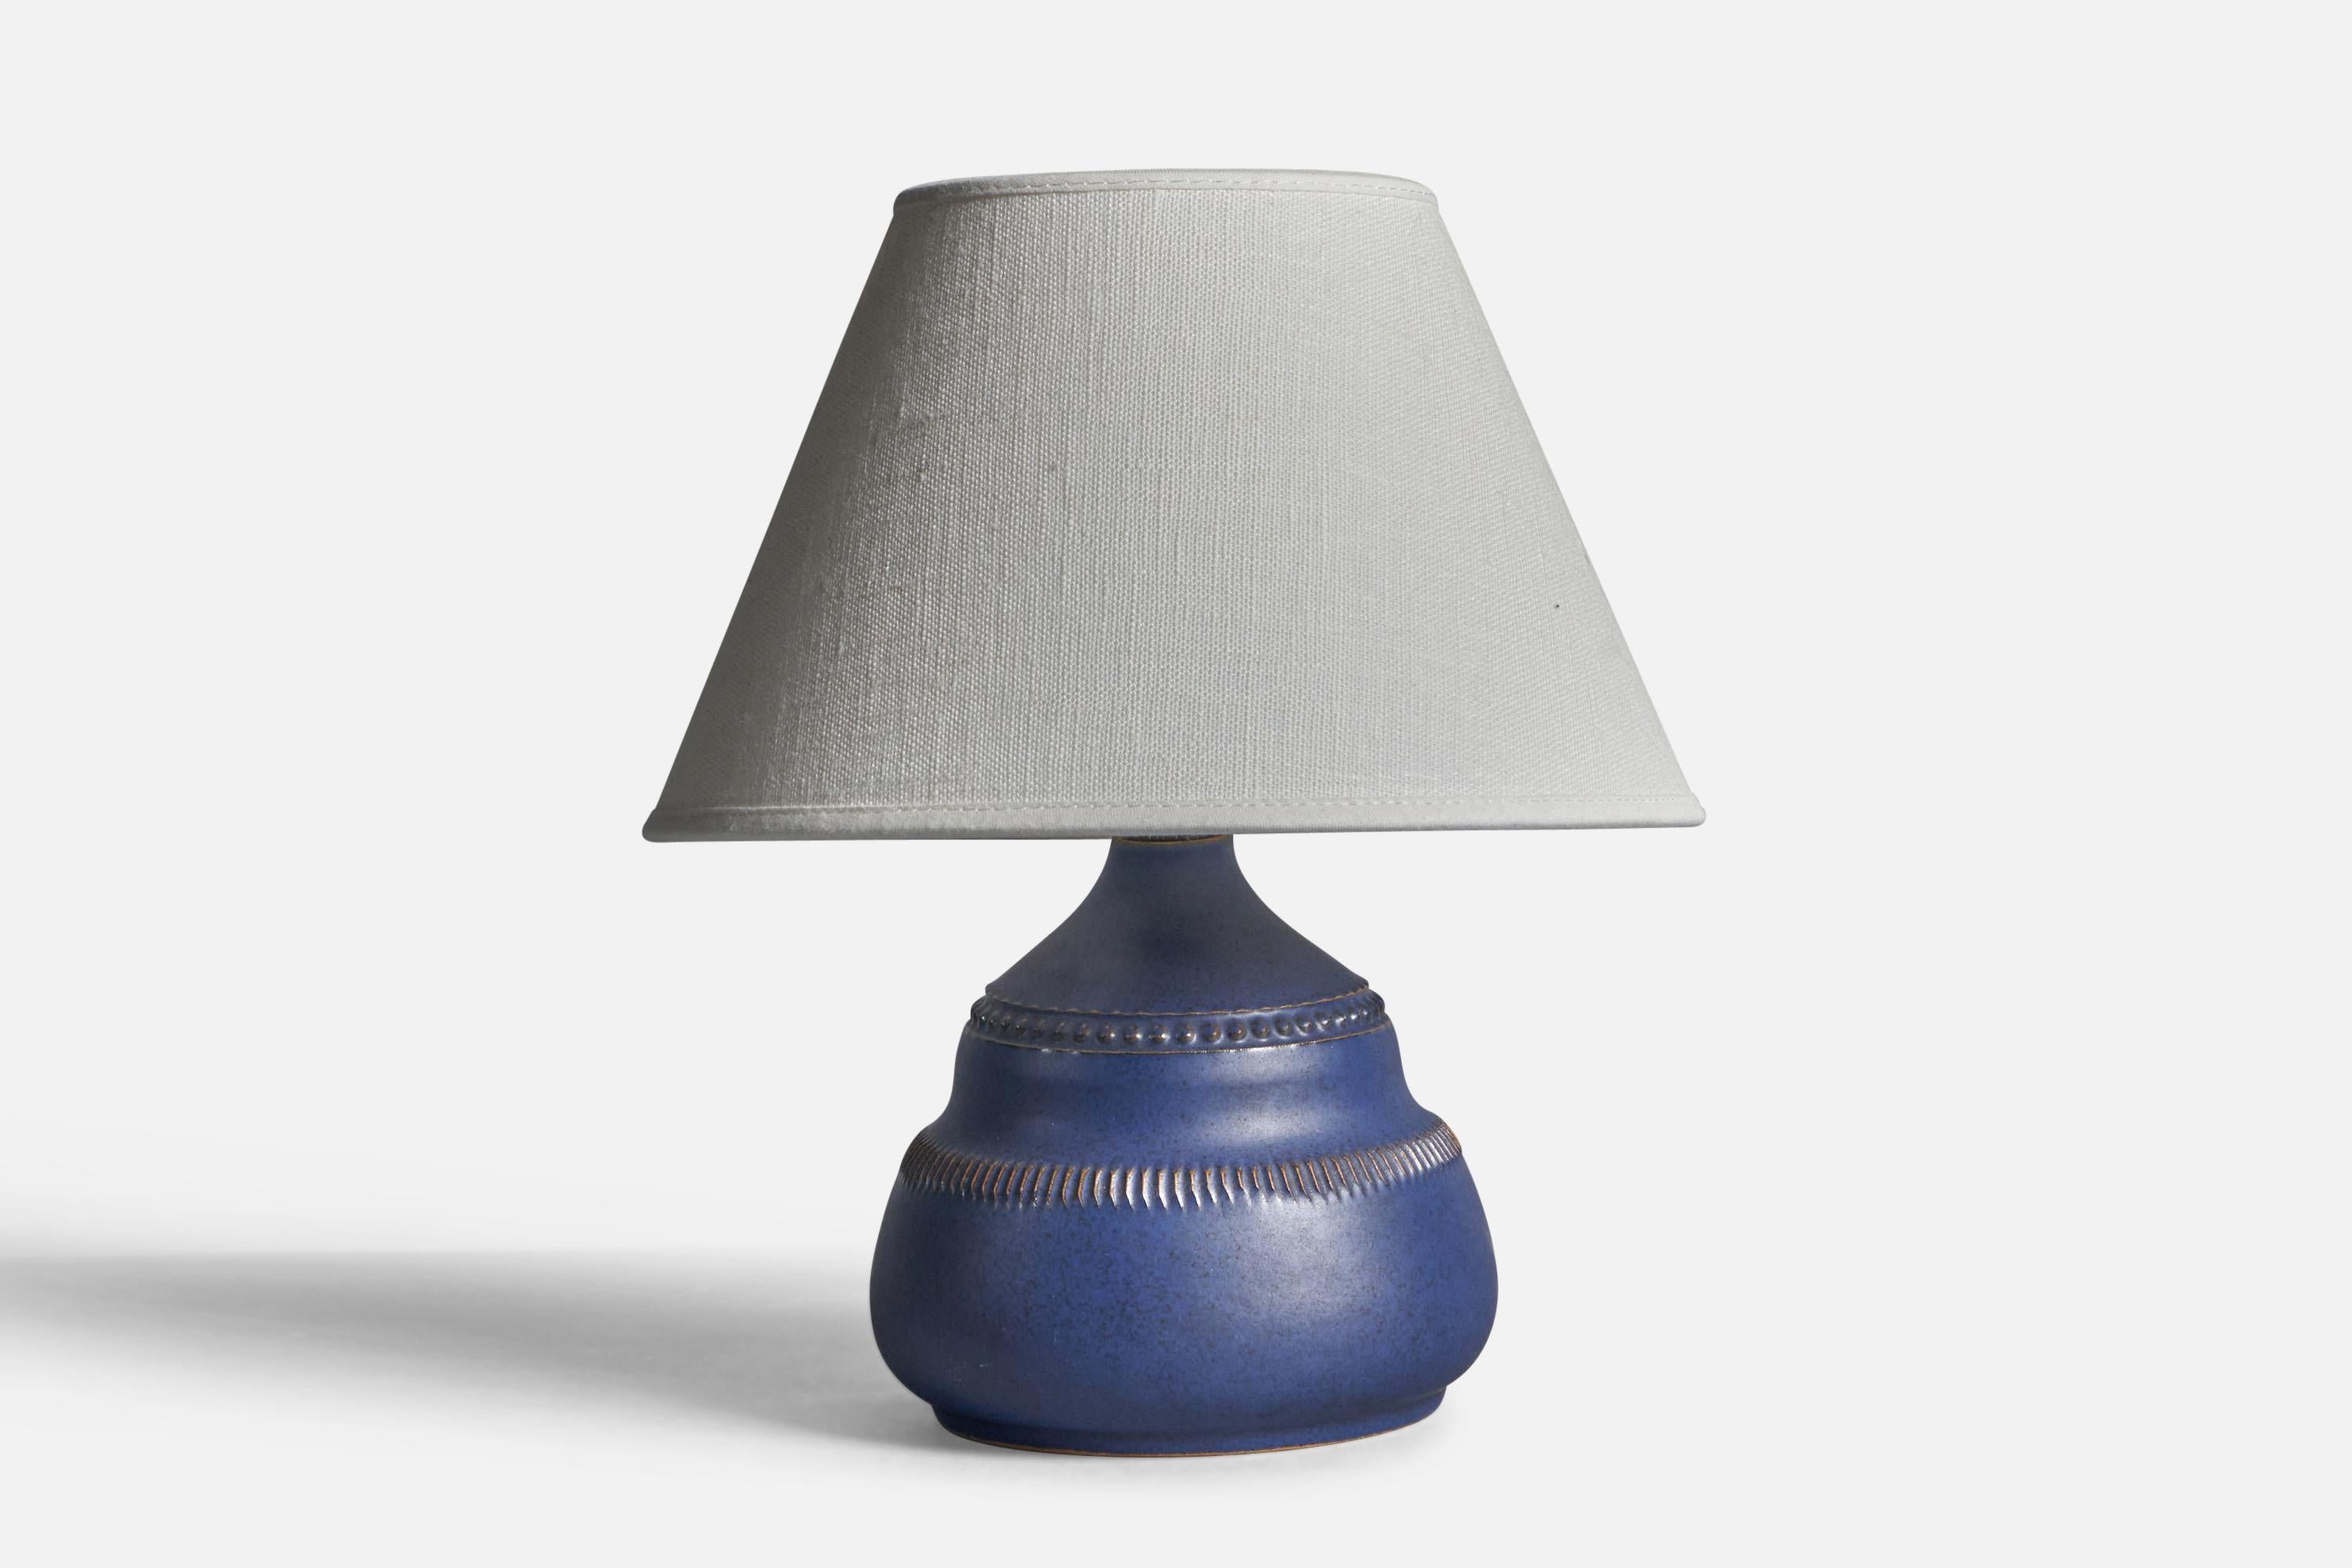 A blue-glazed stoneware table lamp designed and produced by Klase Höganäs, Sweden, 1960s.

Dimensions of Lamp (inches): 6.5